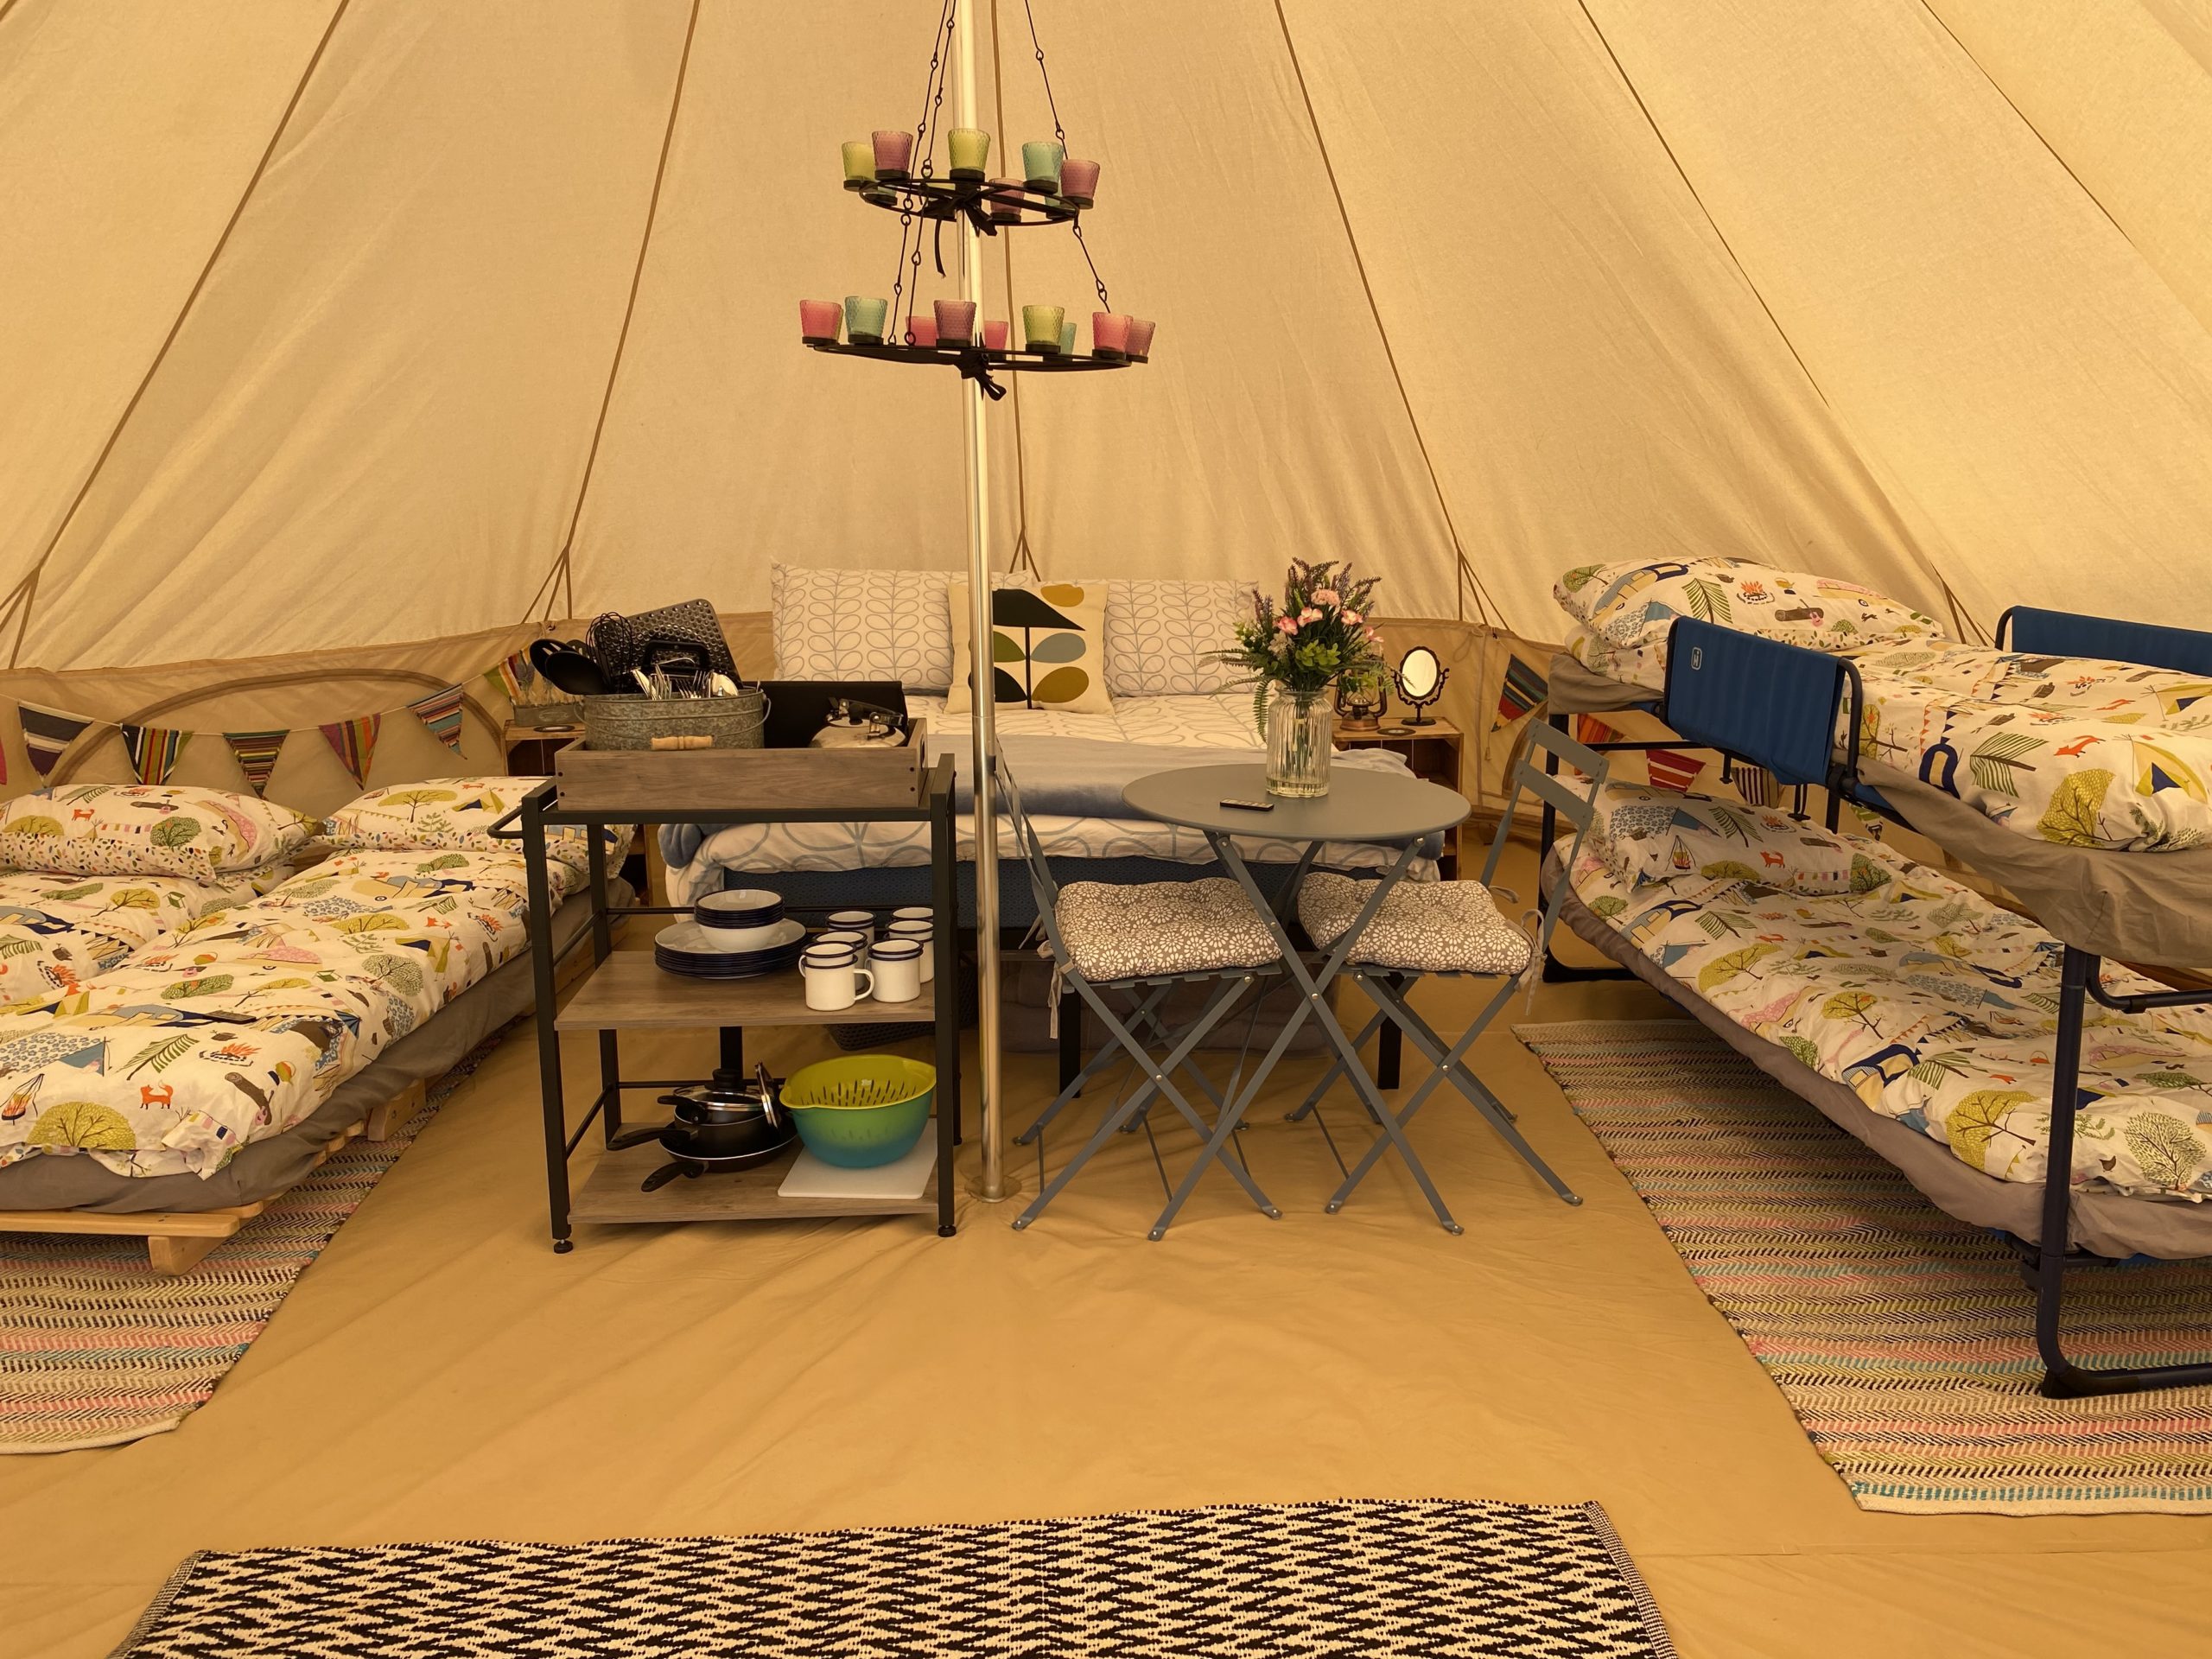 6m bell tent set up with children's camp bunk bed - sleeps 6